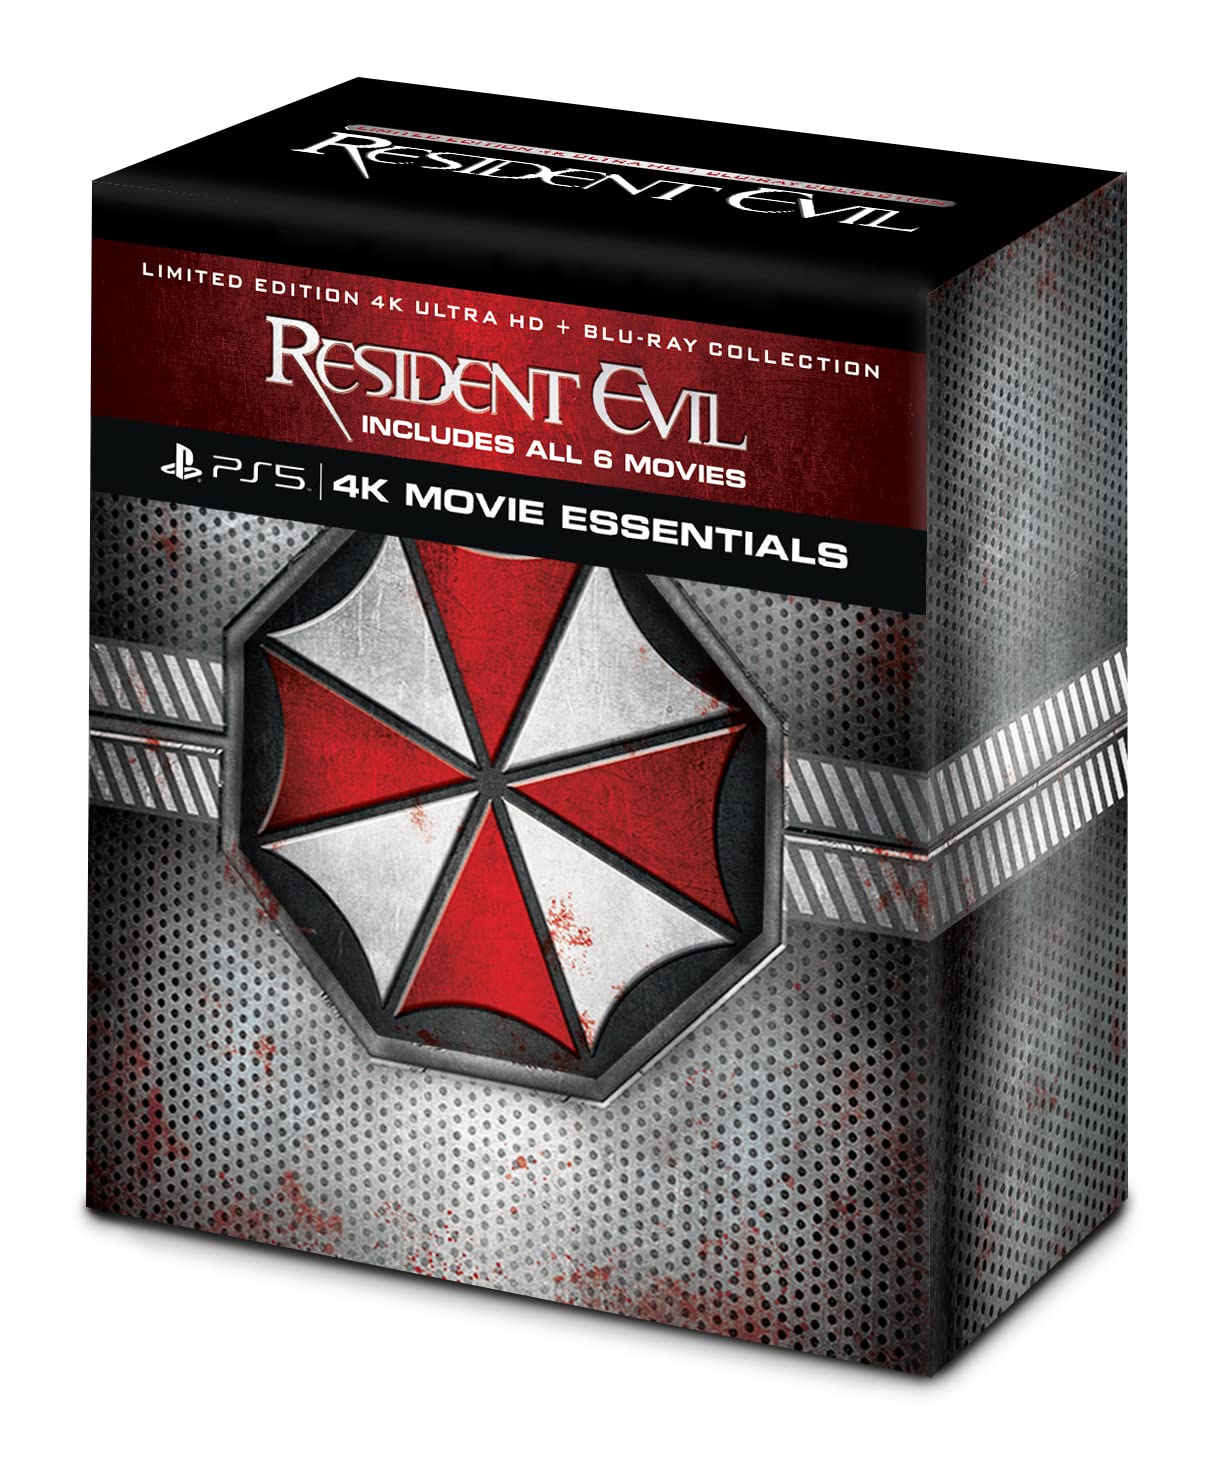 Resident Evil Collection 4K UHD $59.99